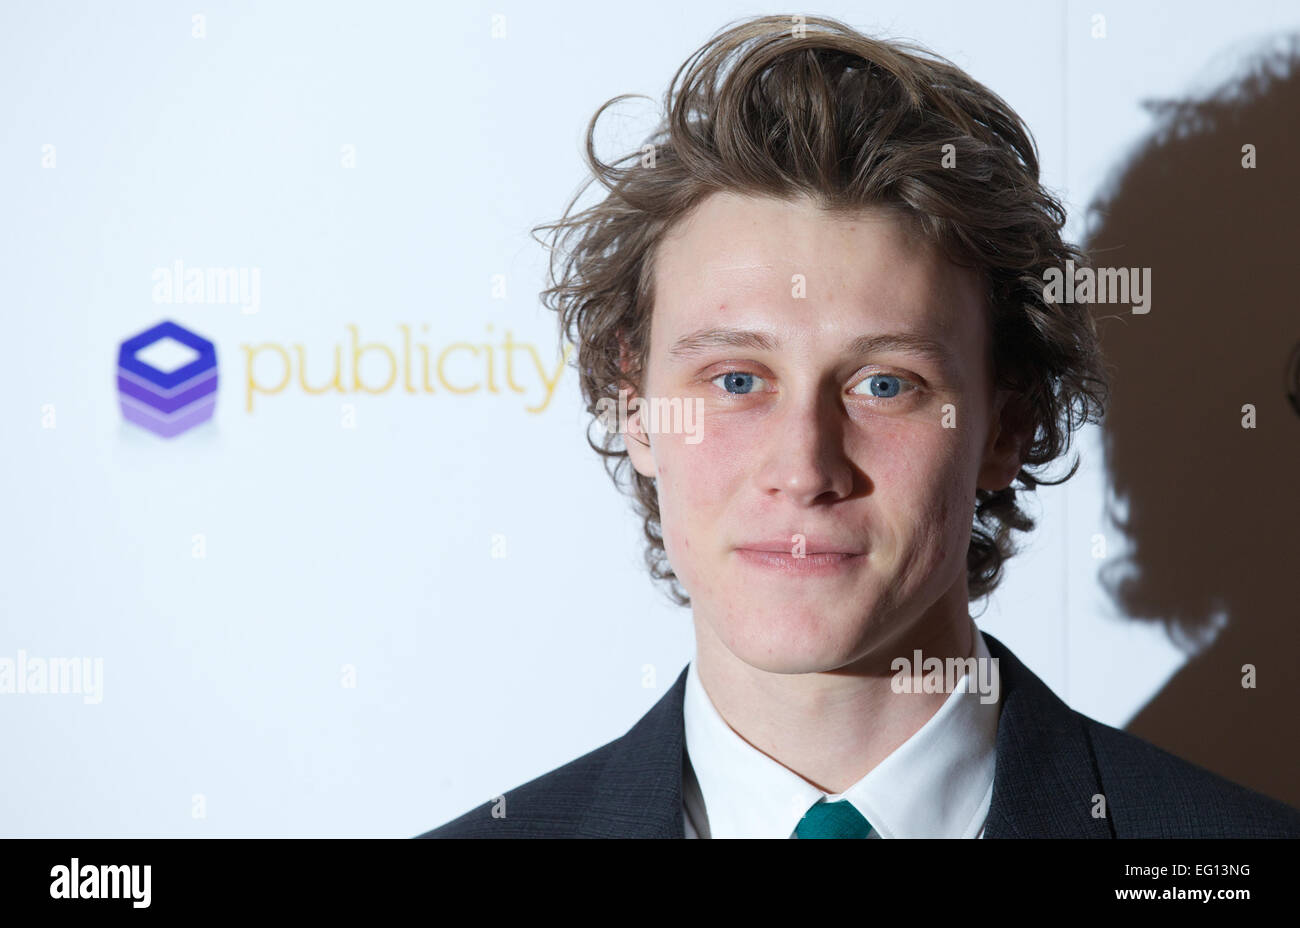 UNITED KINGDOM: British actor George MacKay poses for pictures on the red carpet as he arrives for the 34th London Critics Circle Film Awards in central London on February 2, 2014. Stock Photo